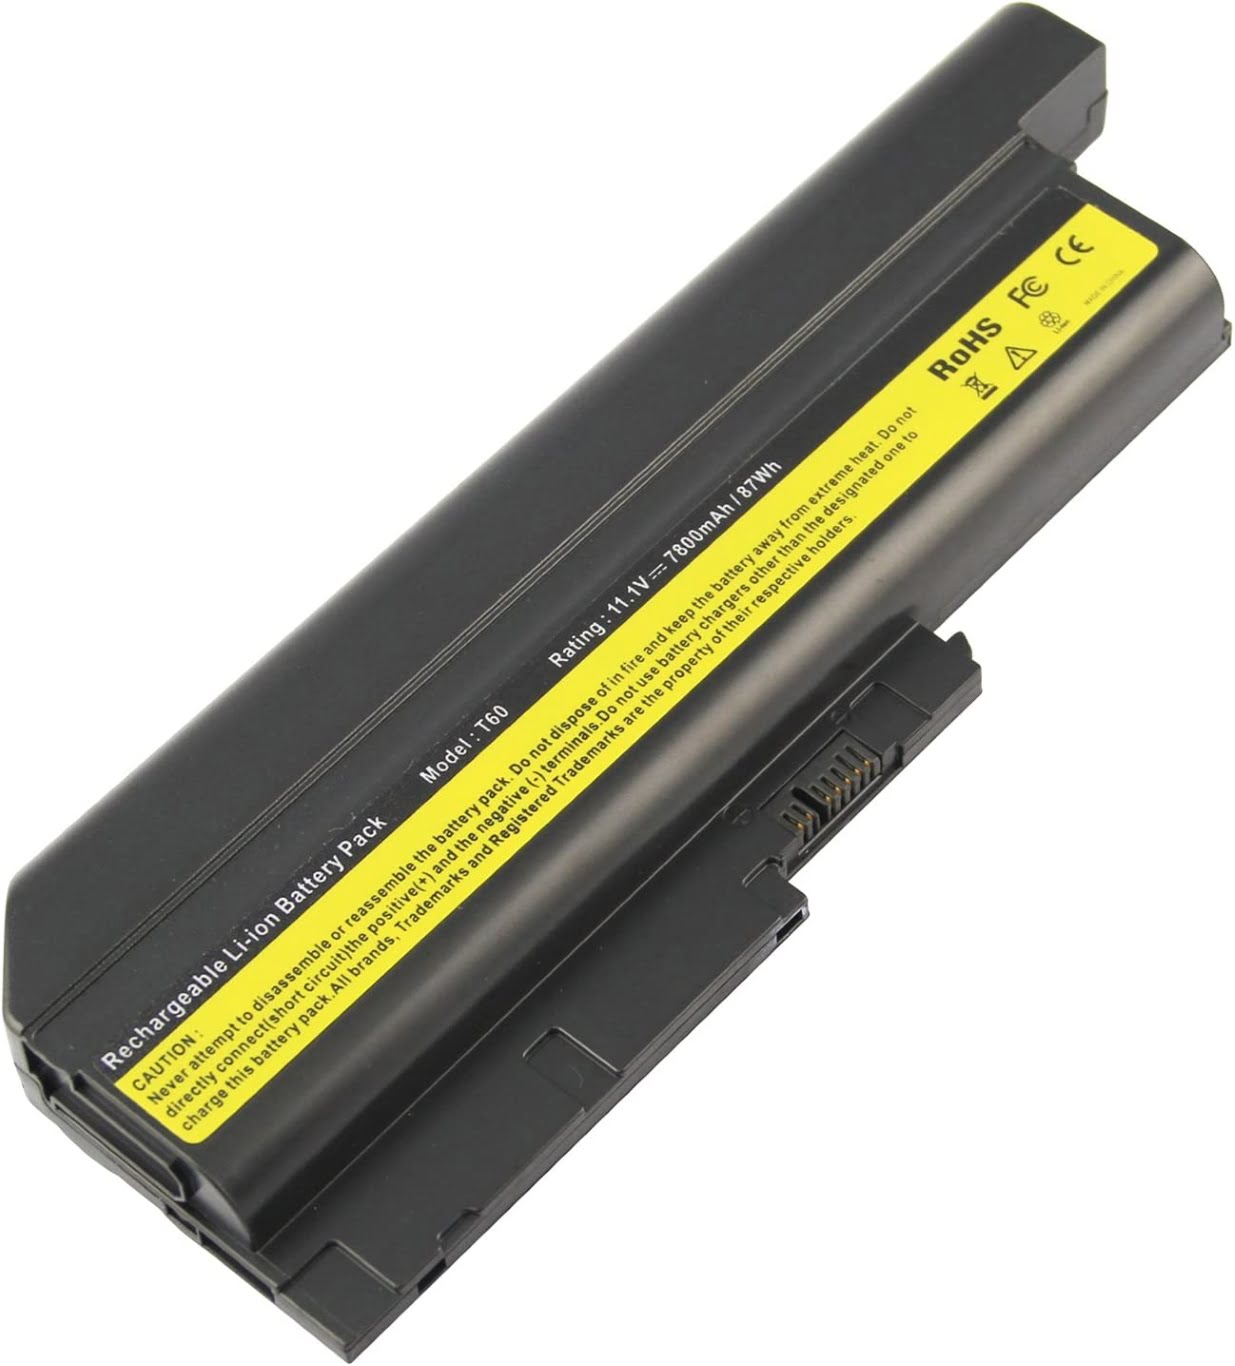 Lenovo 40y6797, 42t5233 Laptop Battery For Thinkpad R60, Thinkpad R60e replacement